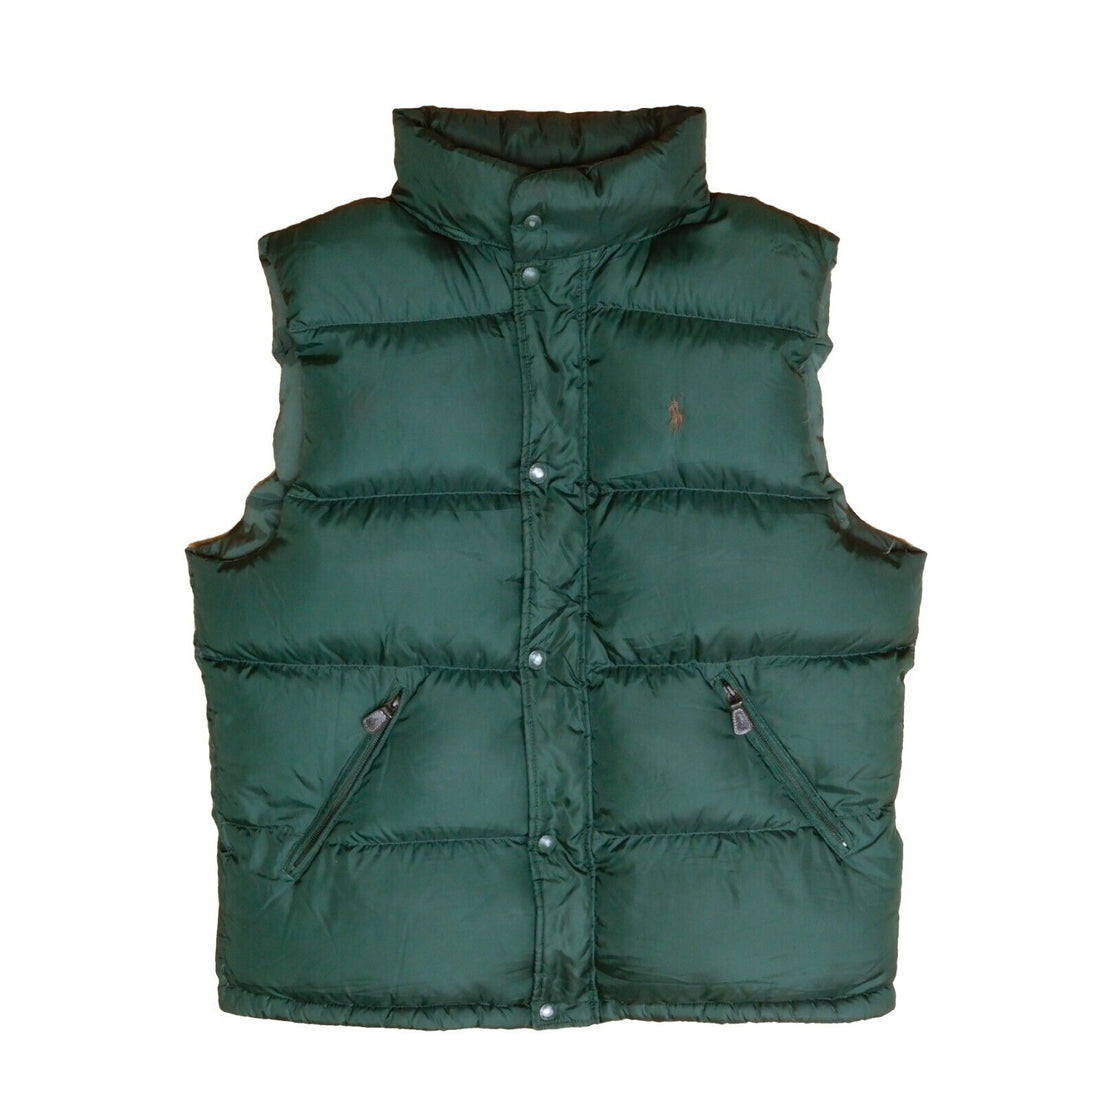 Vintage Polo Ralph Lauren Puffer Vest Size Large Green 90s Down Insula –  Throwback Vault